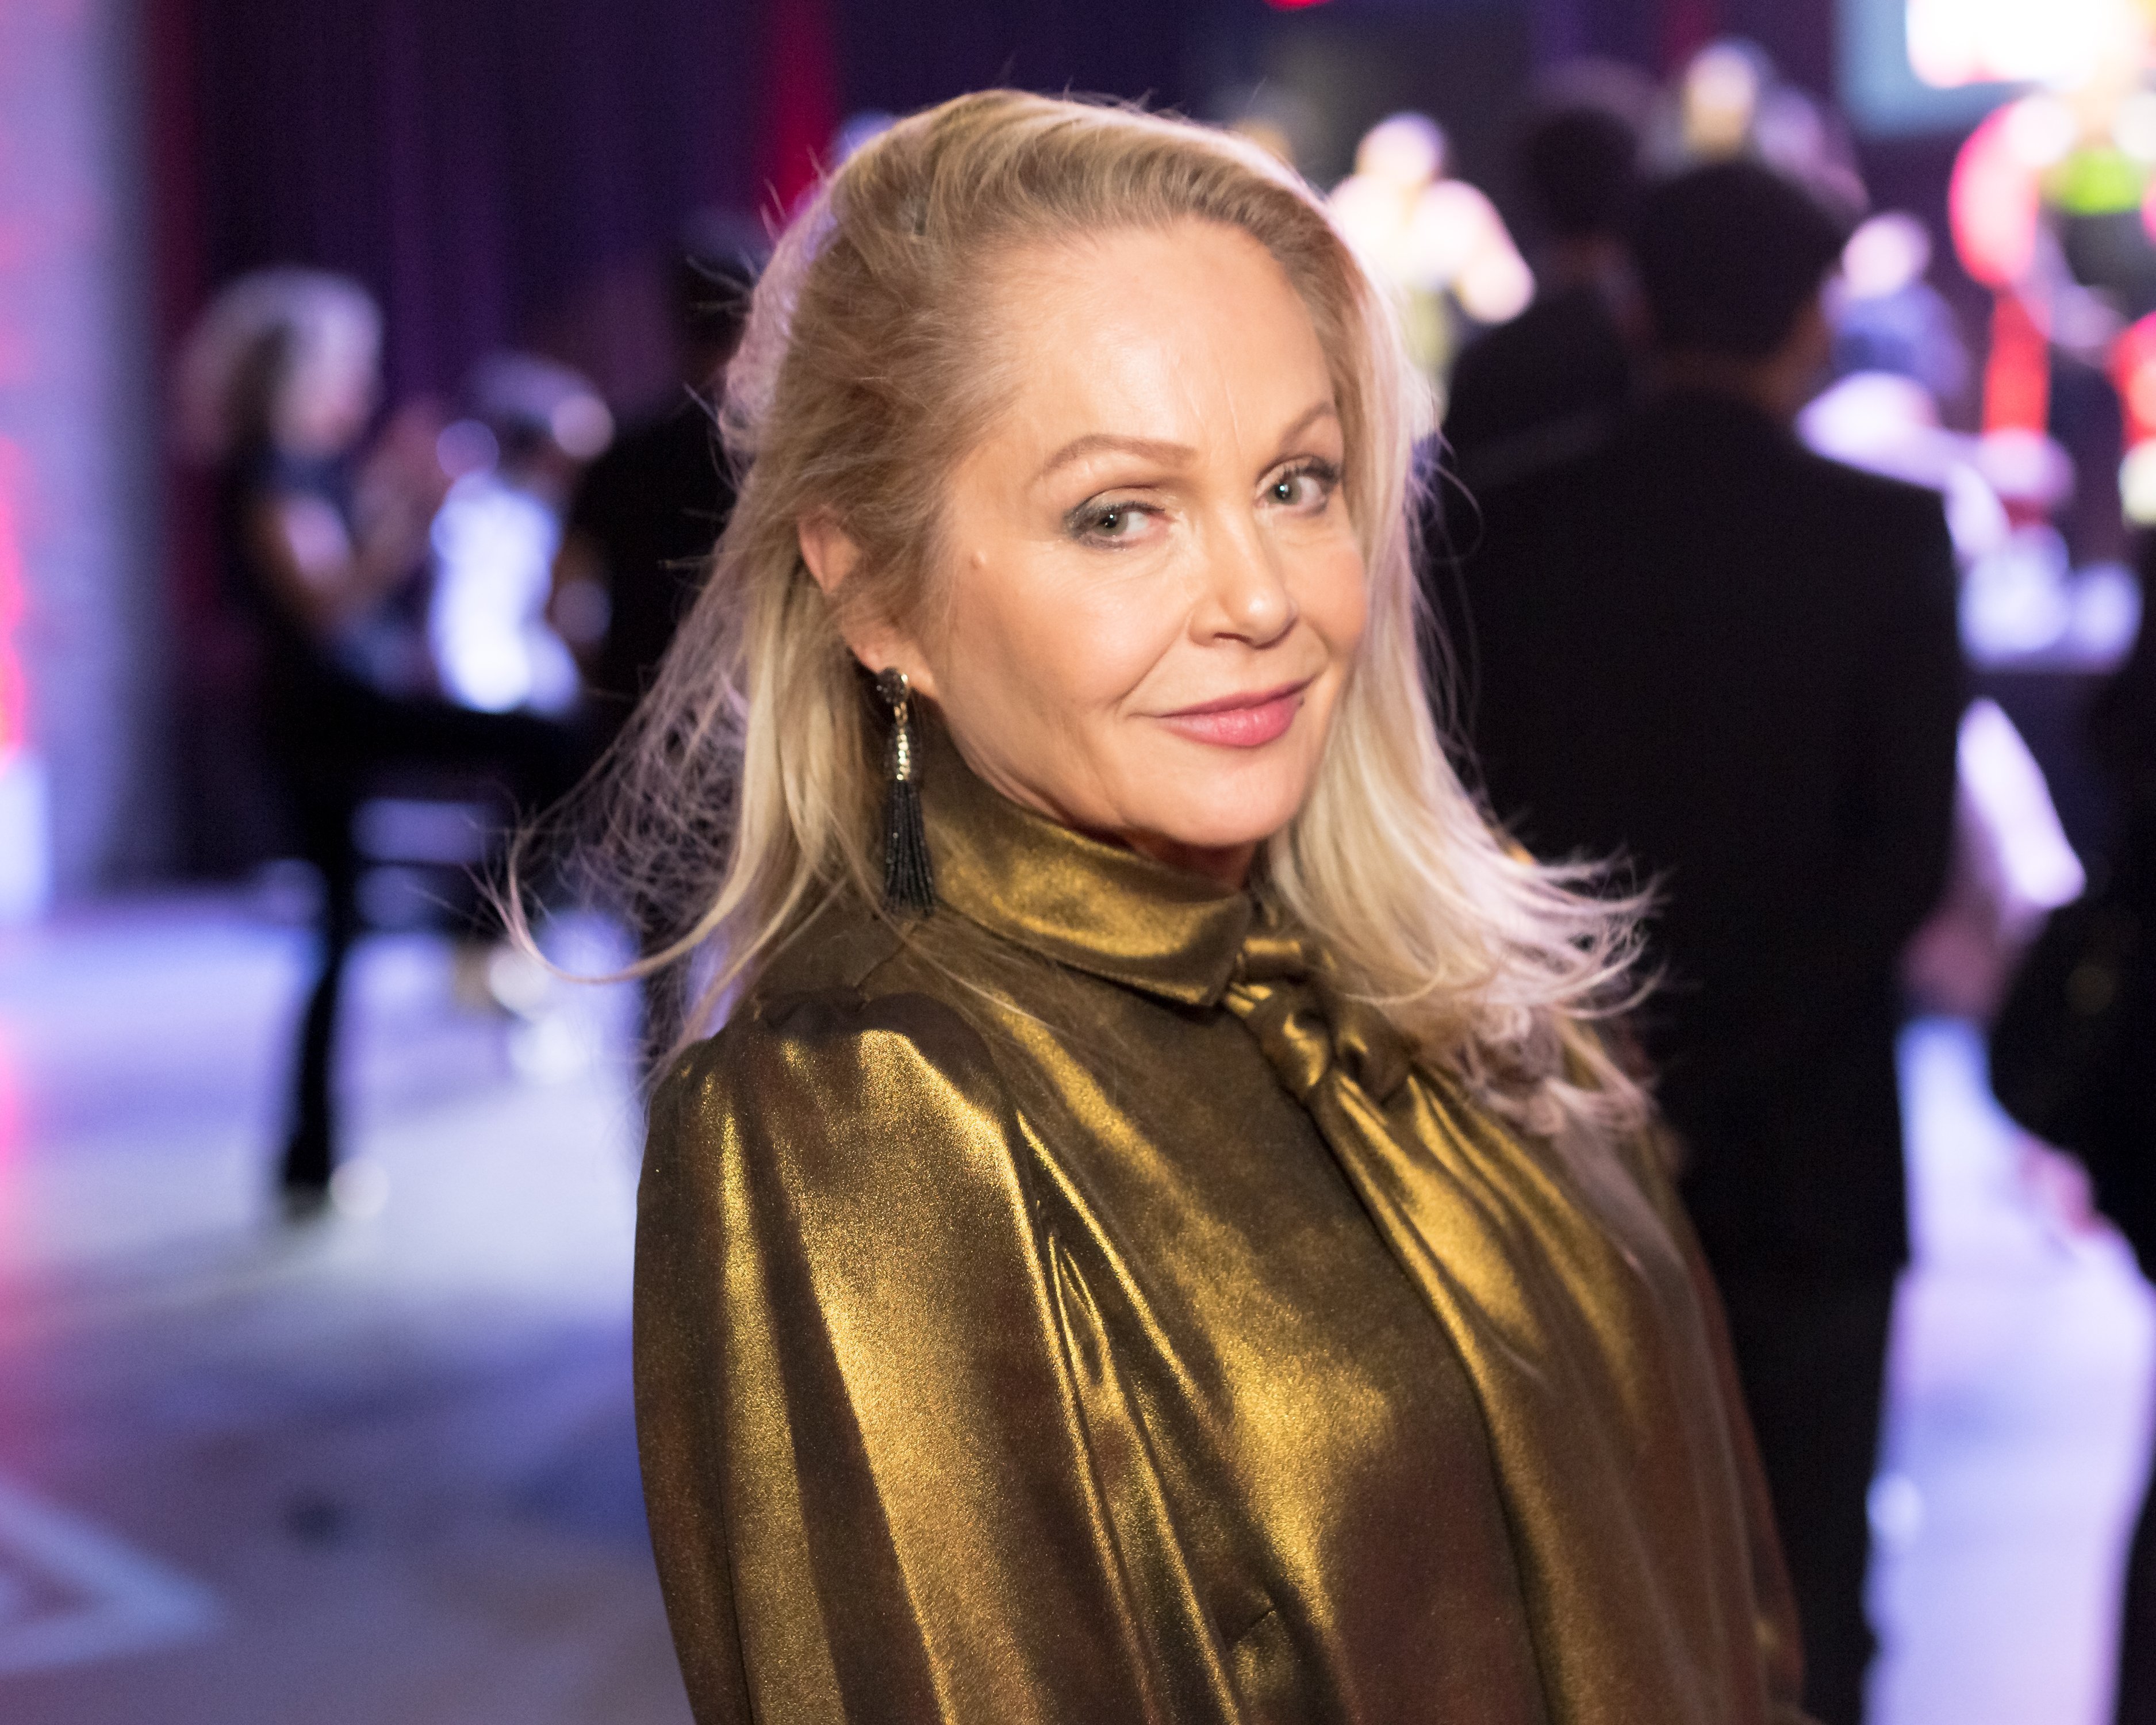 Charlene Tilton attends the Charmaine Blake Presents The Faber Ryan Youth Foundation Gala at Live House Hollywood on October 12, 2019 | Photo: GettyImages